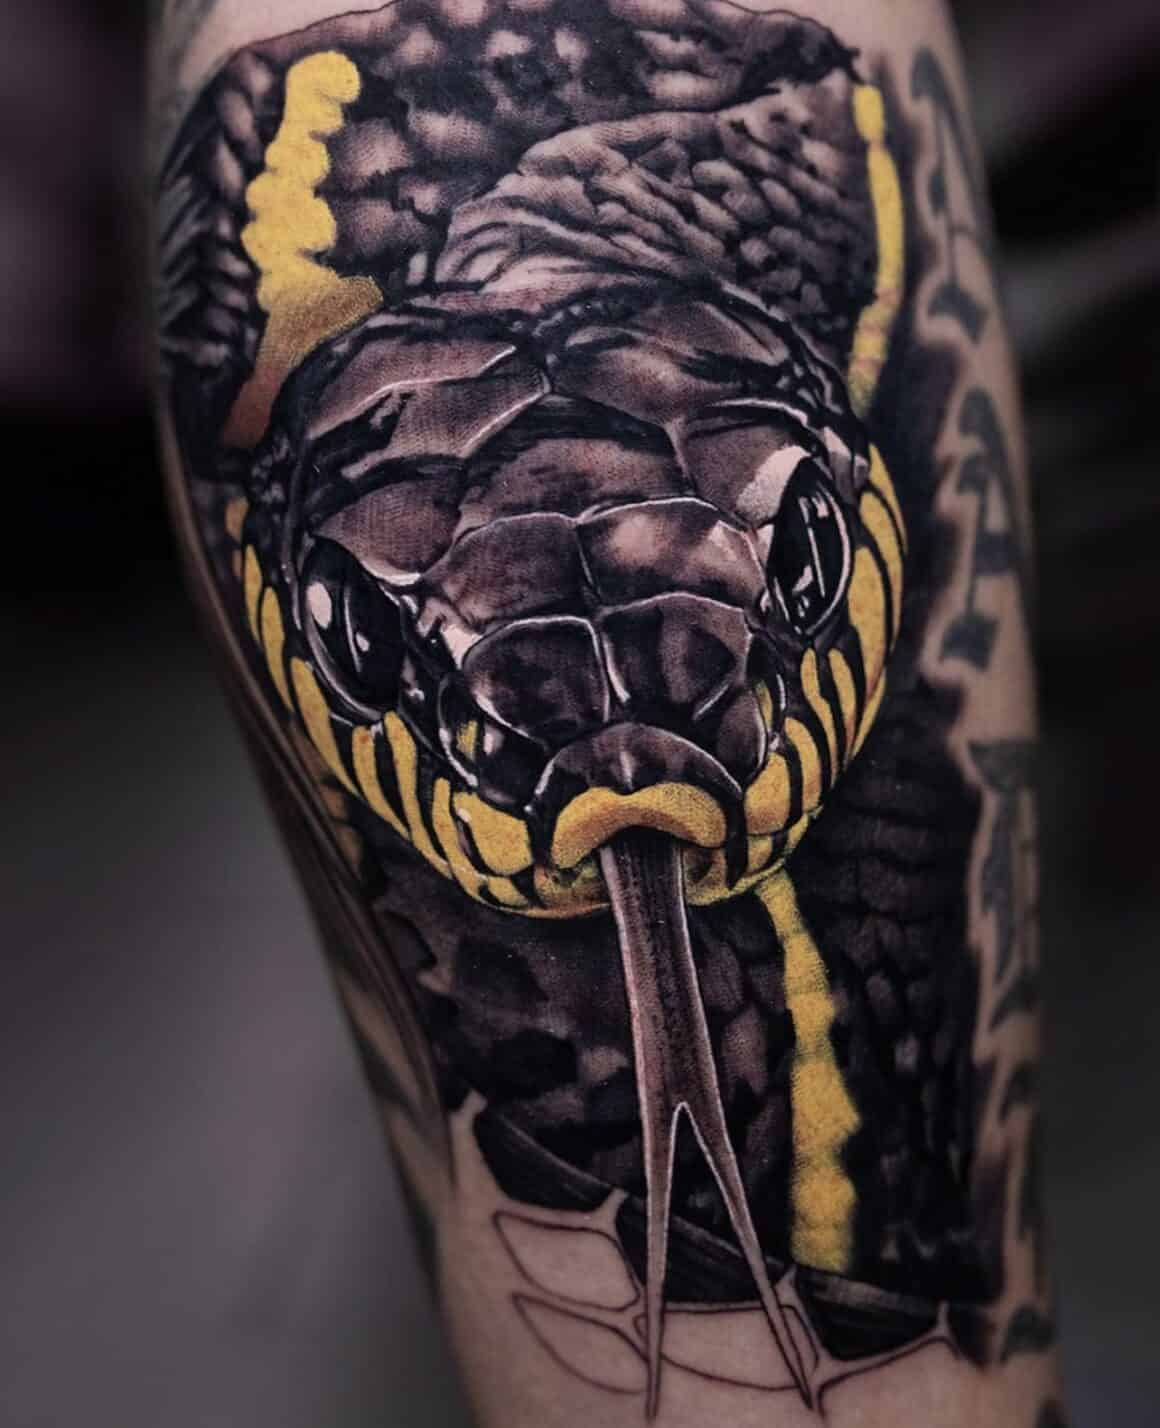 Epic Snake Tattoo That Wraps Around Man's Arm and Neck Was Entirely  Freehanded - Bellatory News